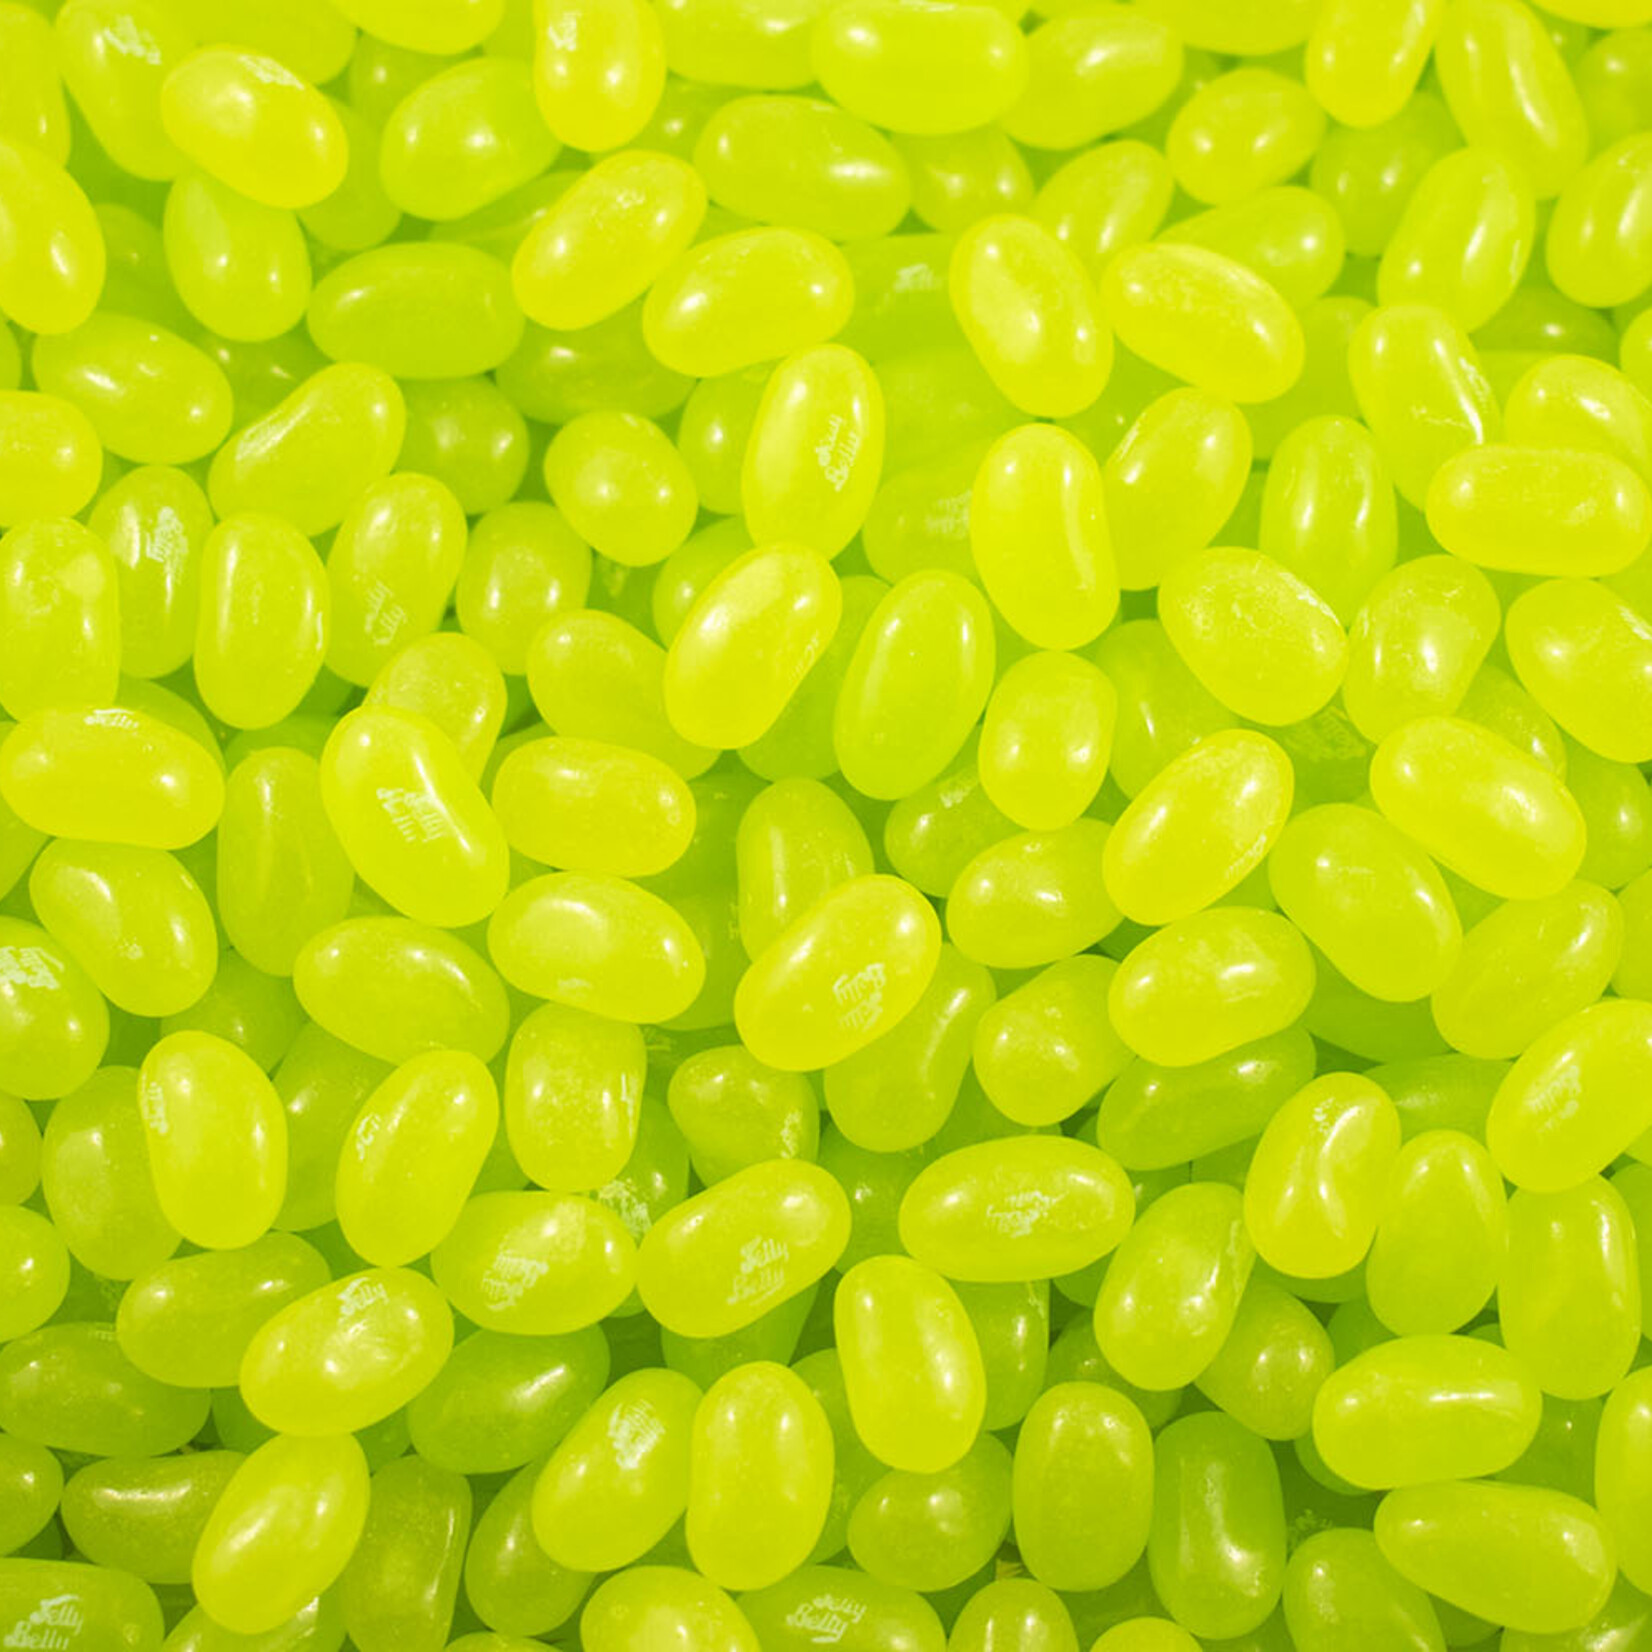 Jelly Belly Jelly Belly Citron-Lime